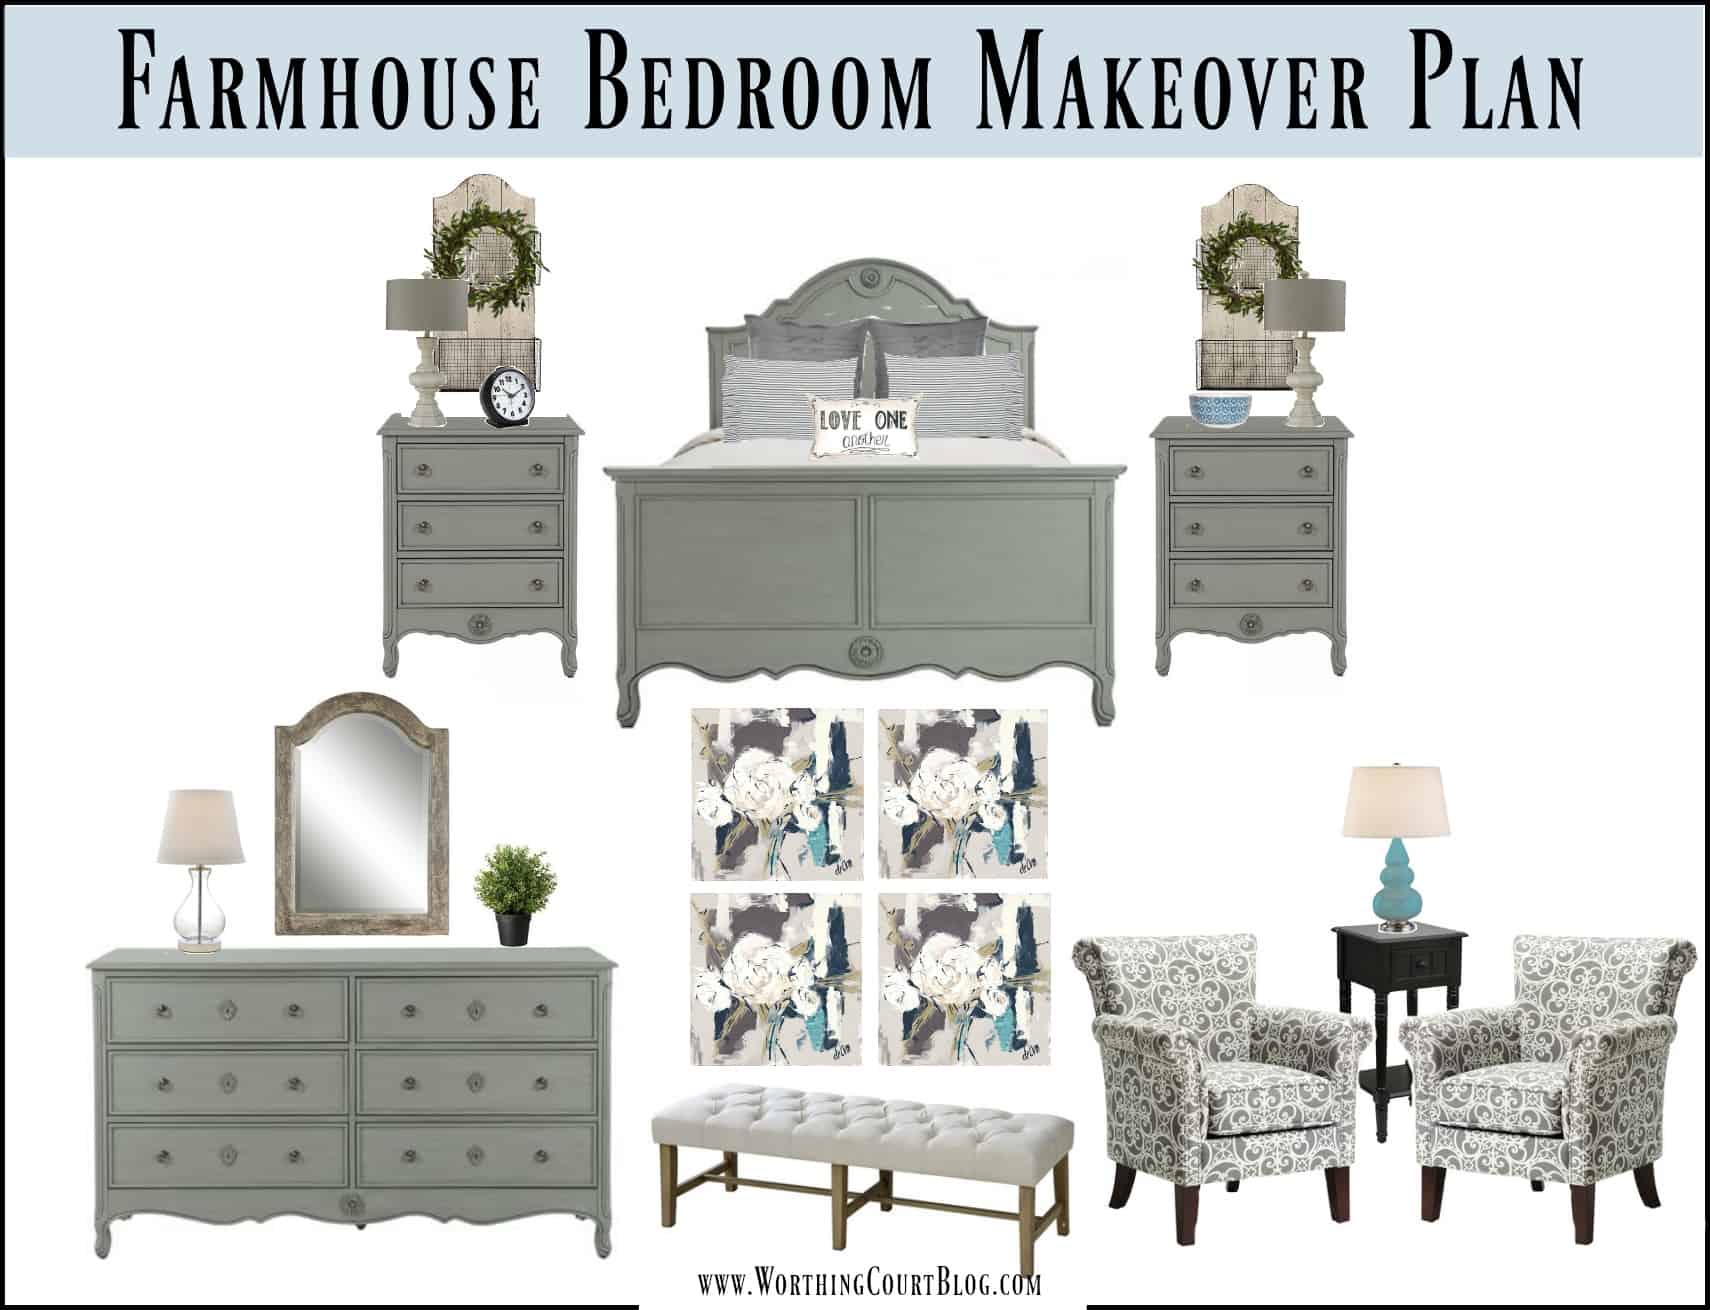 Farmhouse style bedroom makeover plans || Worthing Court